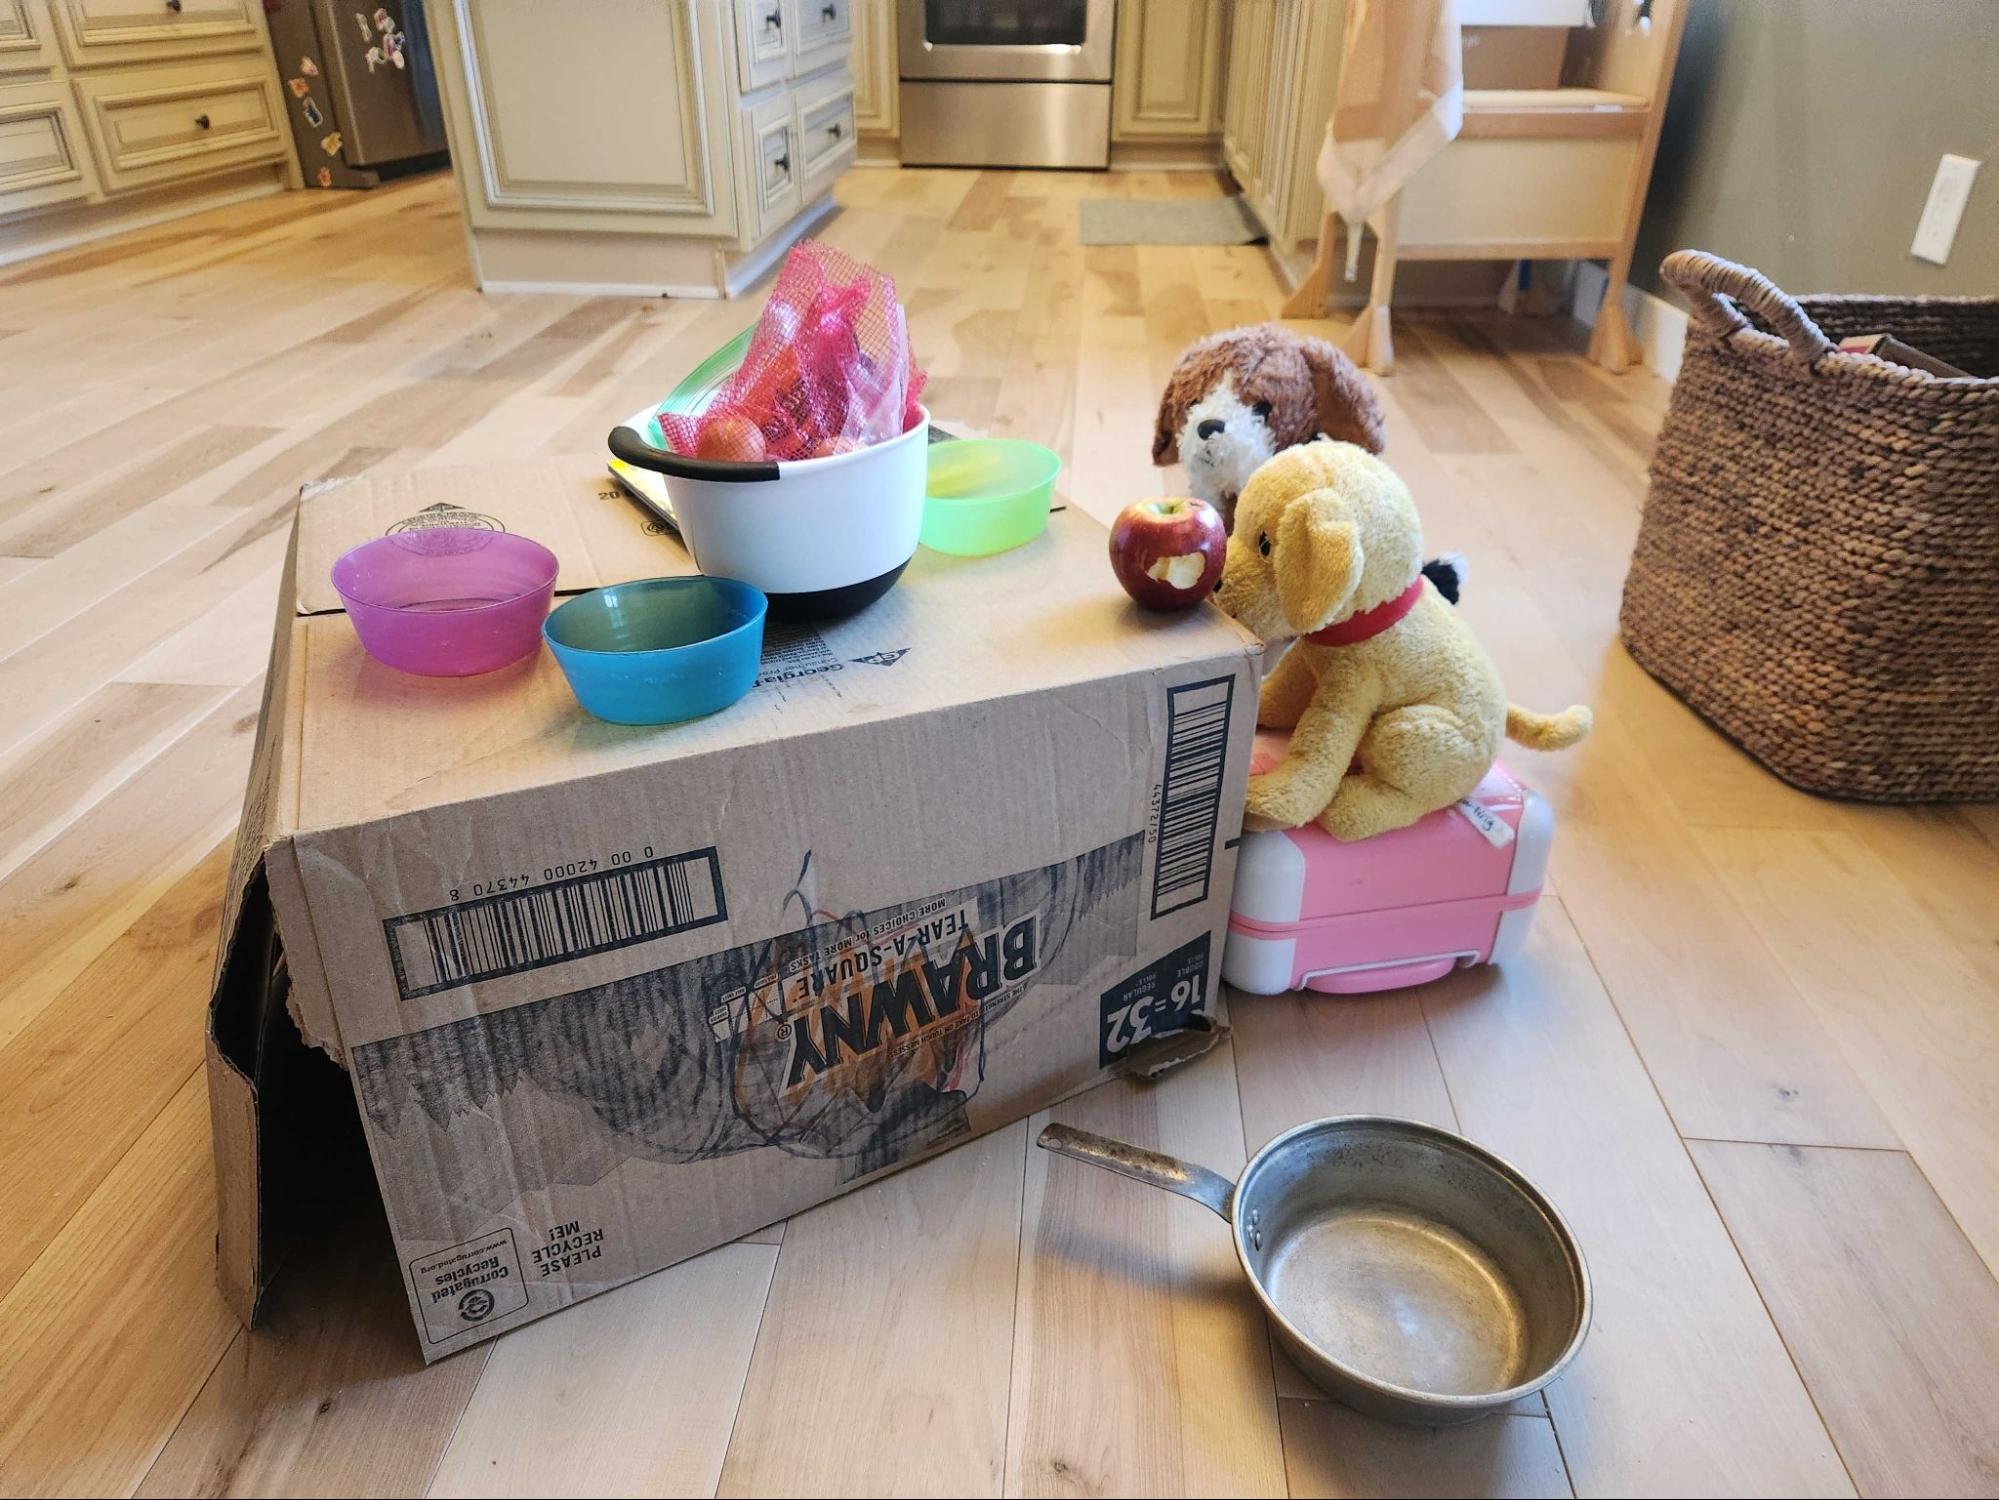 Photo of two stuffed animals sitting at a table made out of a recycled Brawny box on a wood kitchen floor. The box has an apple on it as well as some dishes and vegetables in a bag. There is a frying pan on the floor in front of the box.